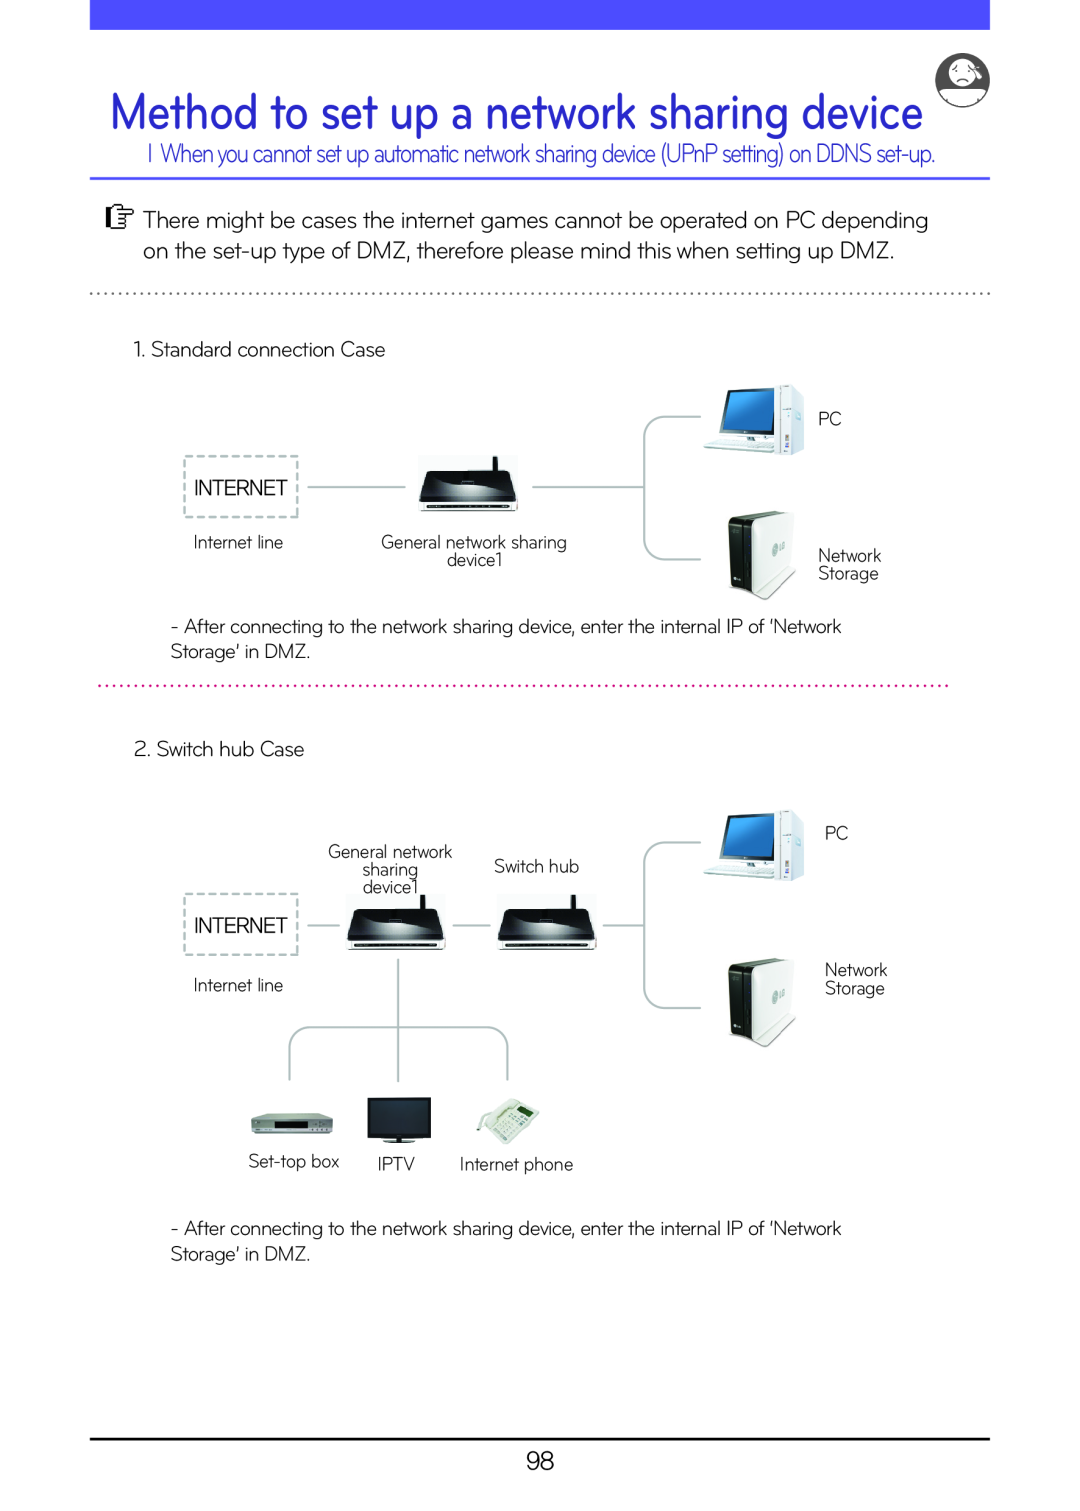 LG Electronics N2A2, N2R5, N1A1, N1T1 Method to set up a network sharing device, Standard connection Case, Switch hub Case 